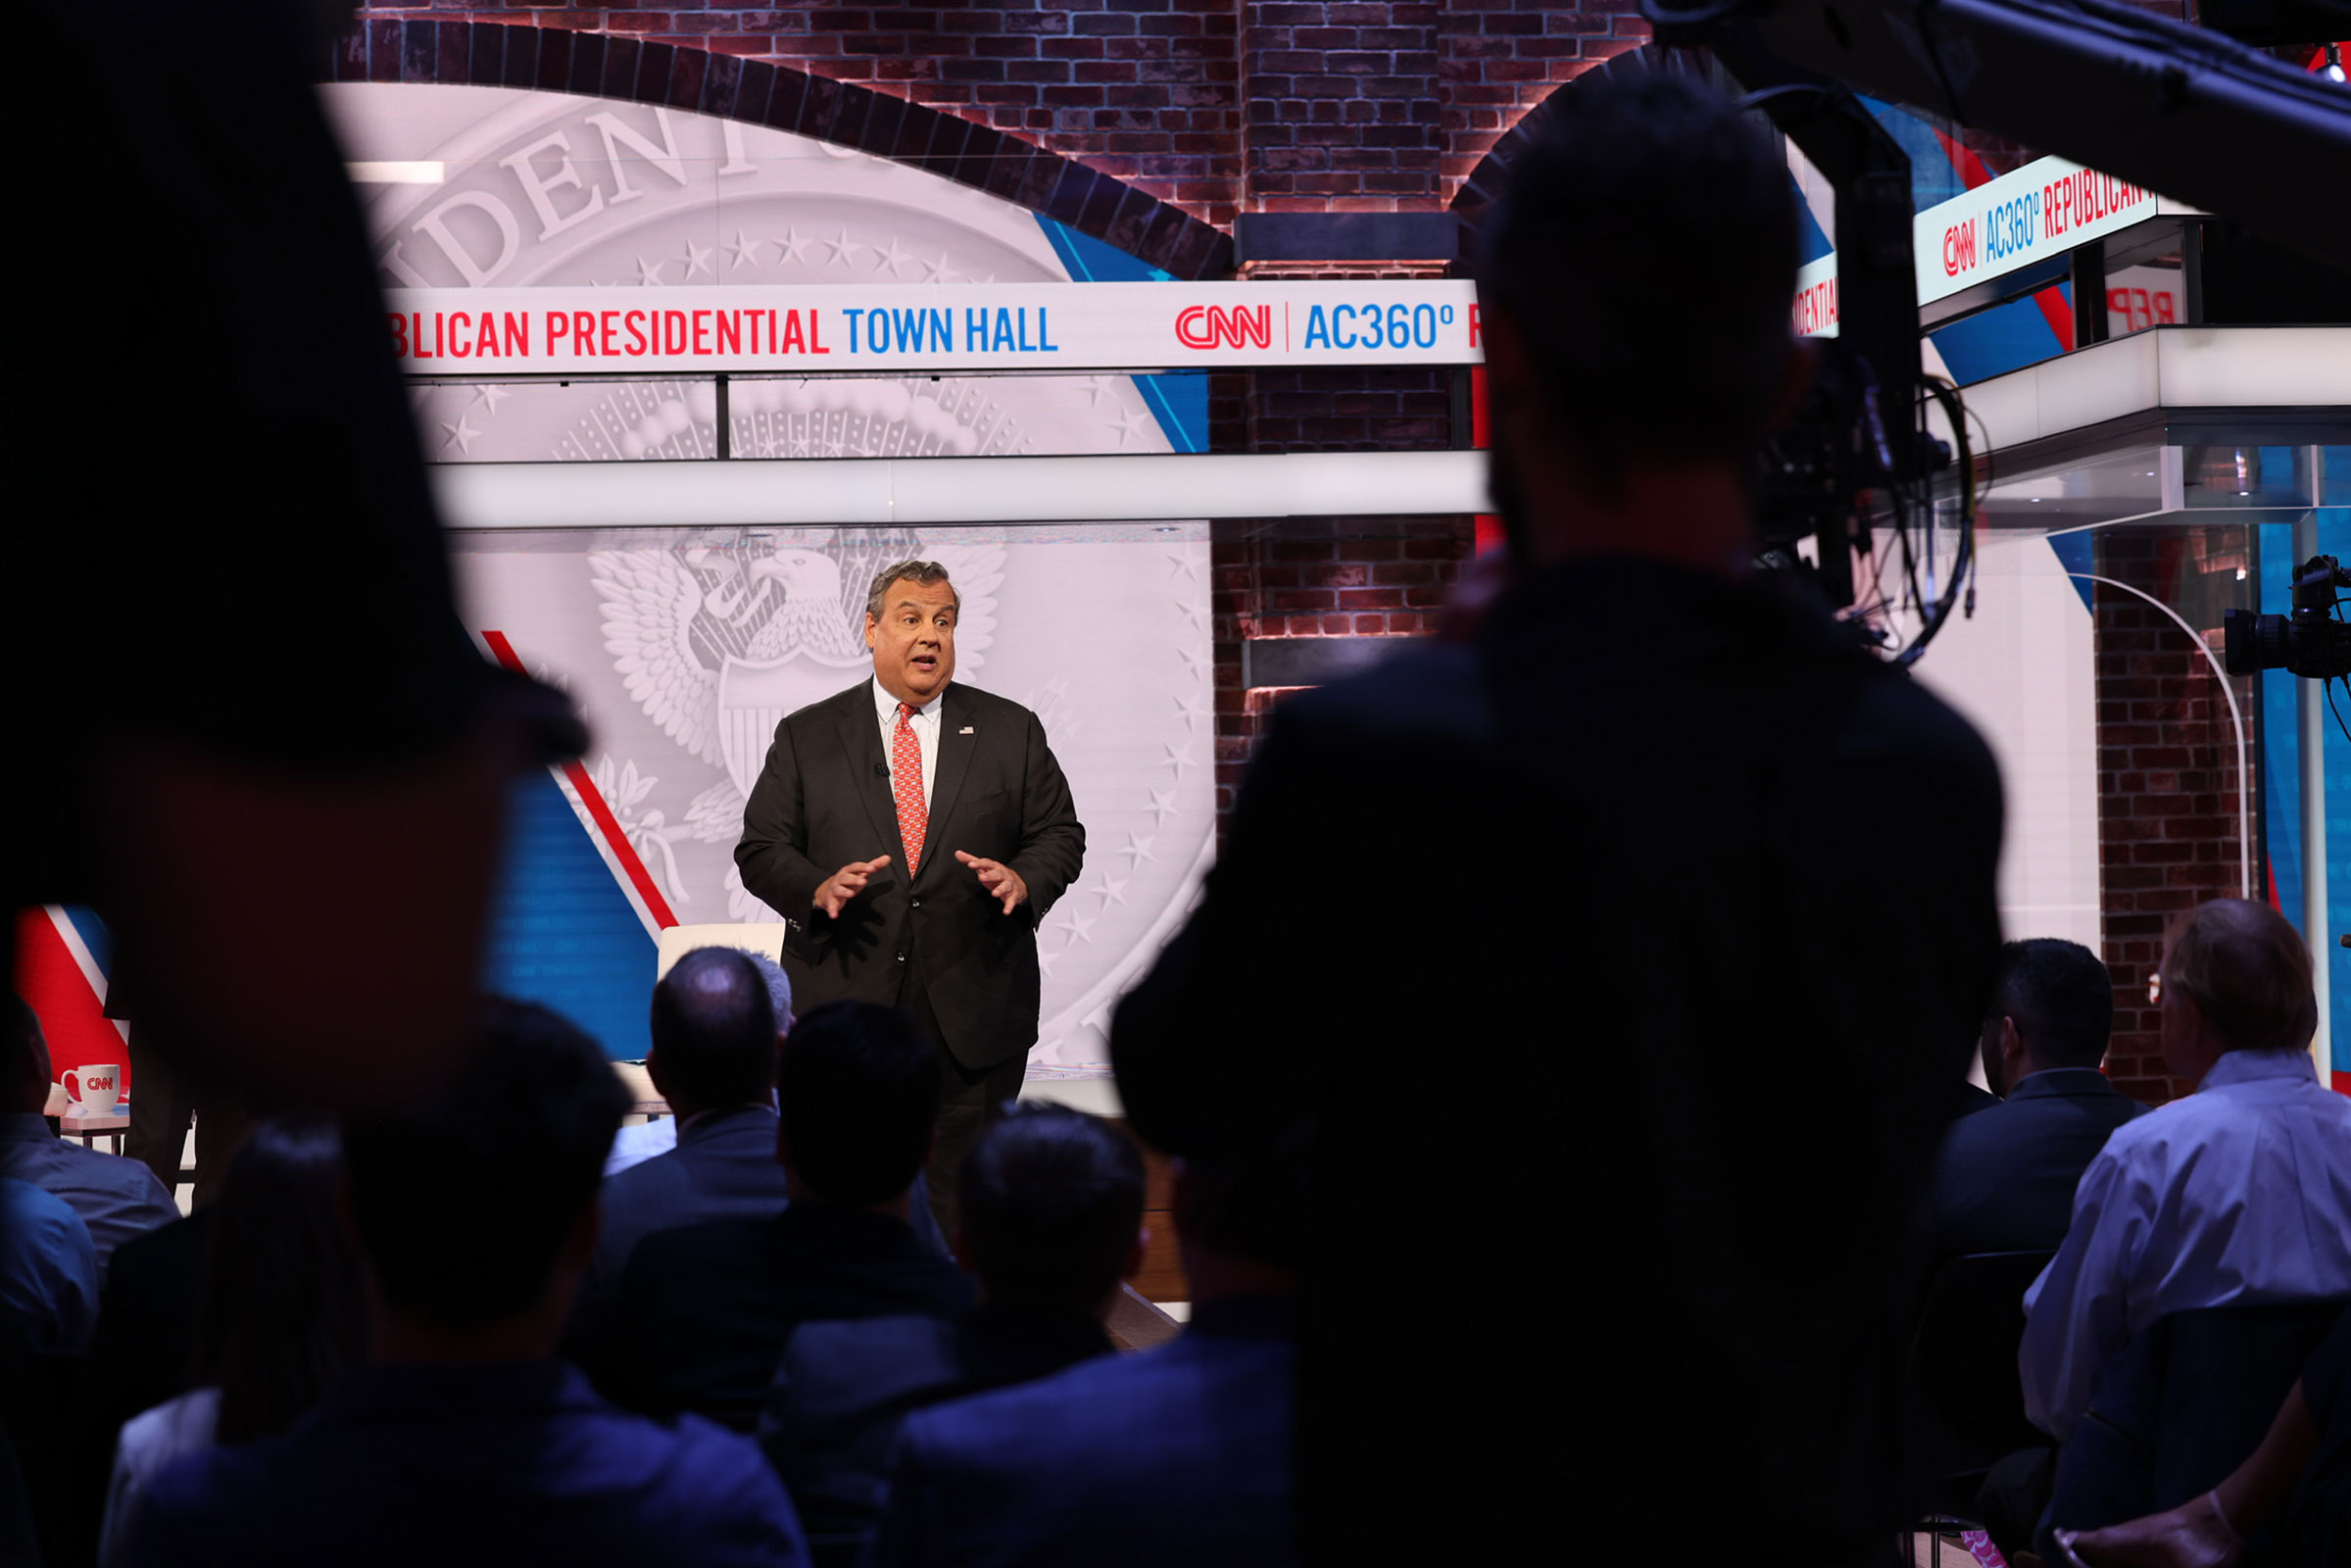 New Jersey Gov. Chris Christie speaks at a CNN Republican Presidential Town Hall moderated by CNN’s Anderson Cooper in New York on Monday, June 12.